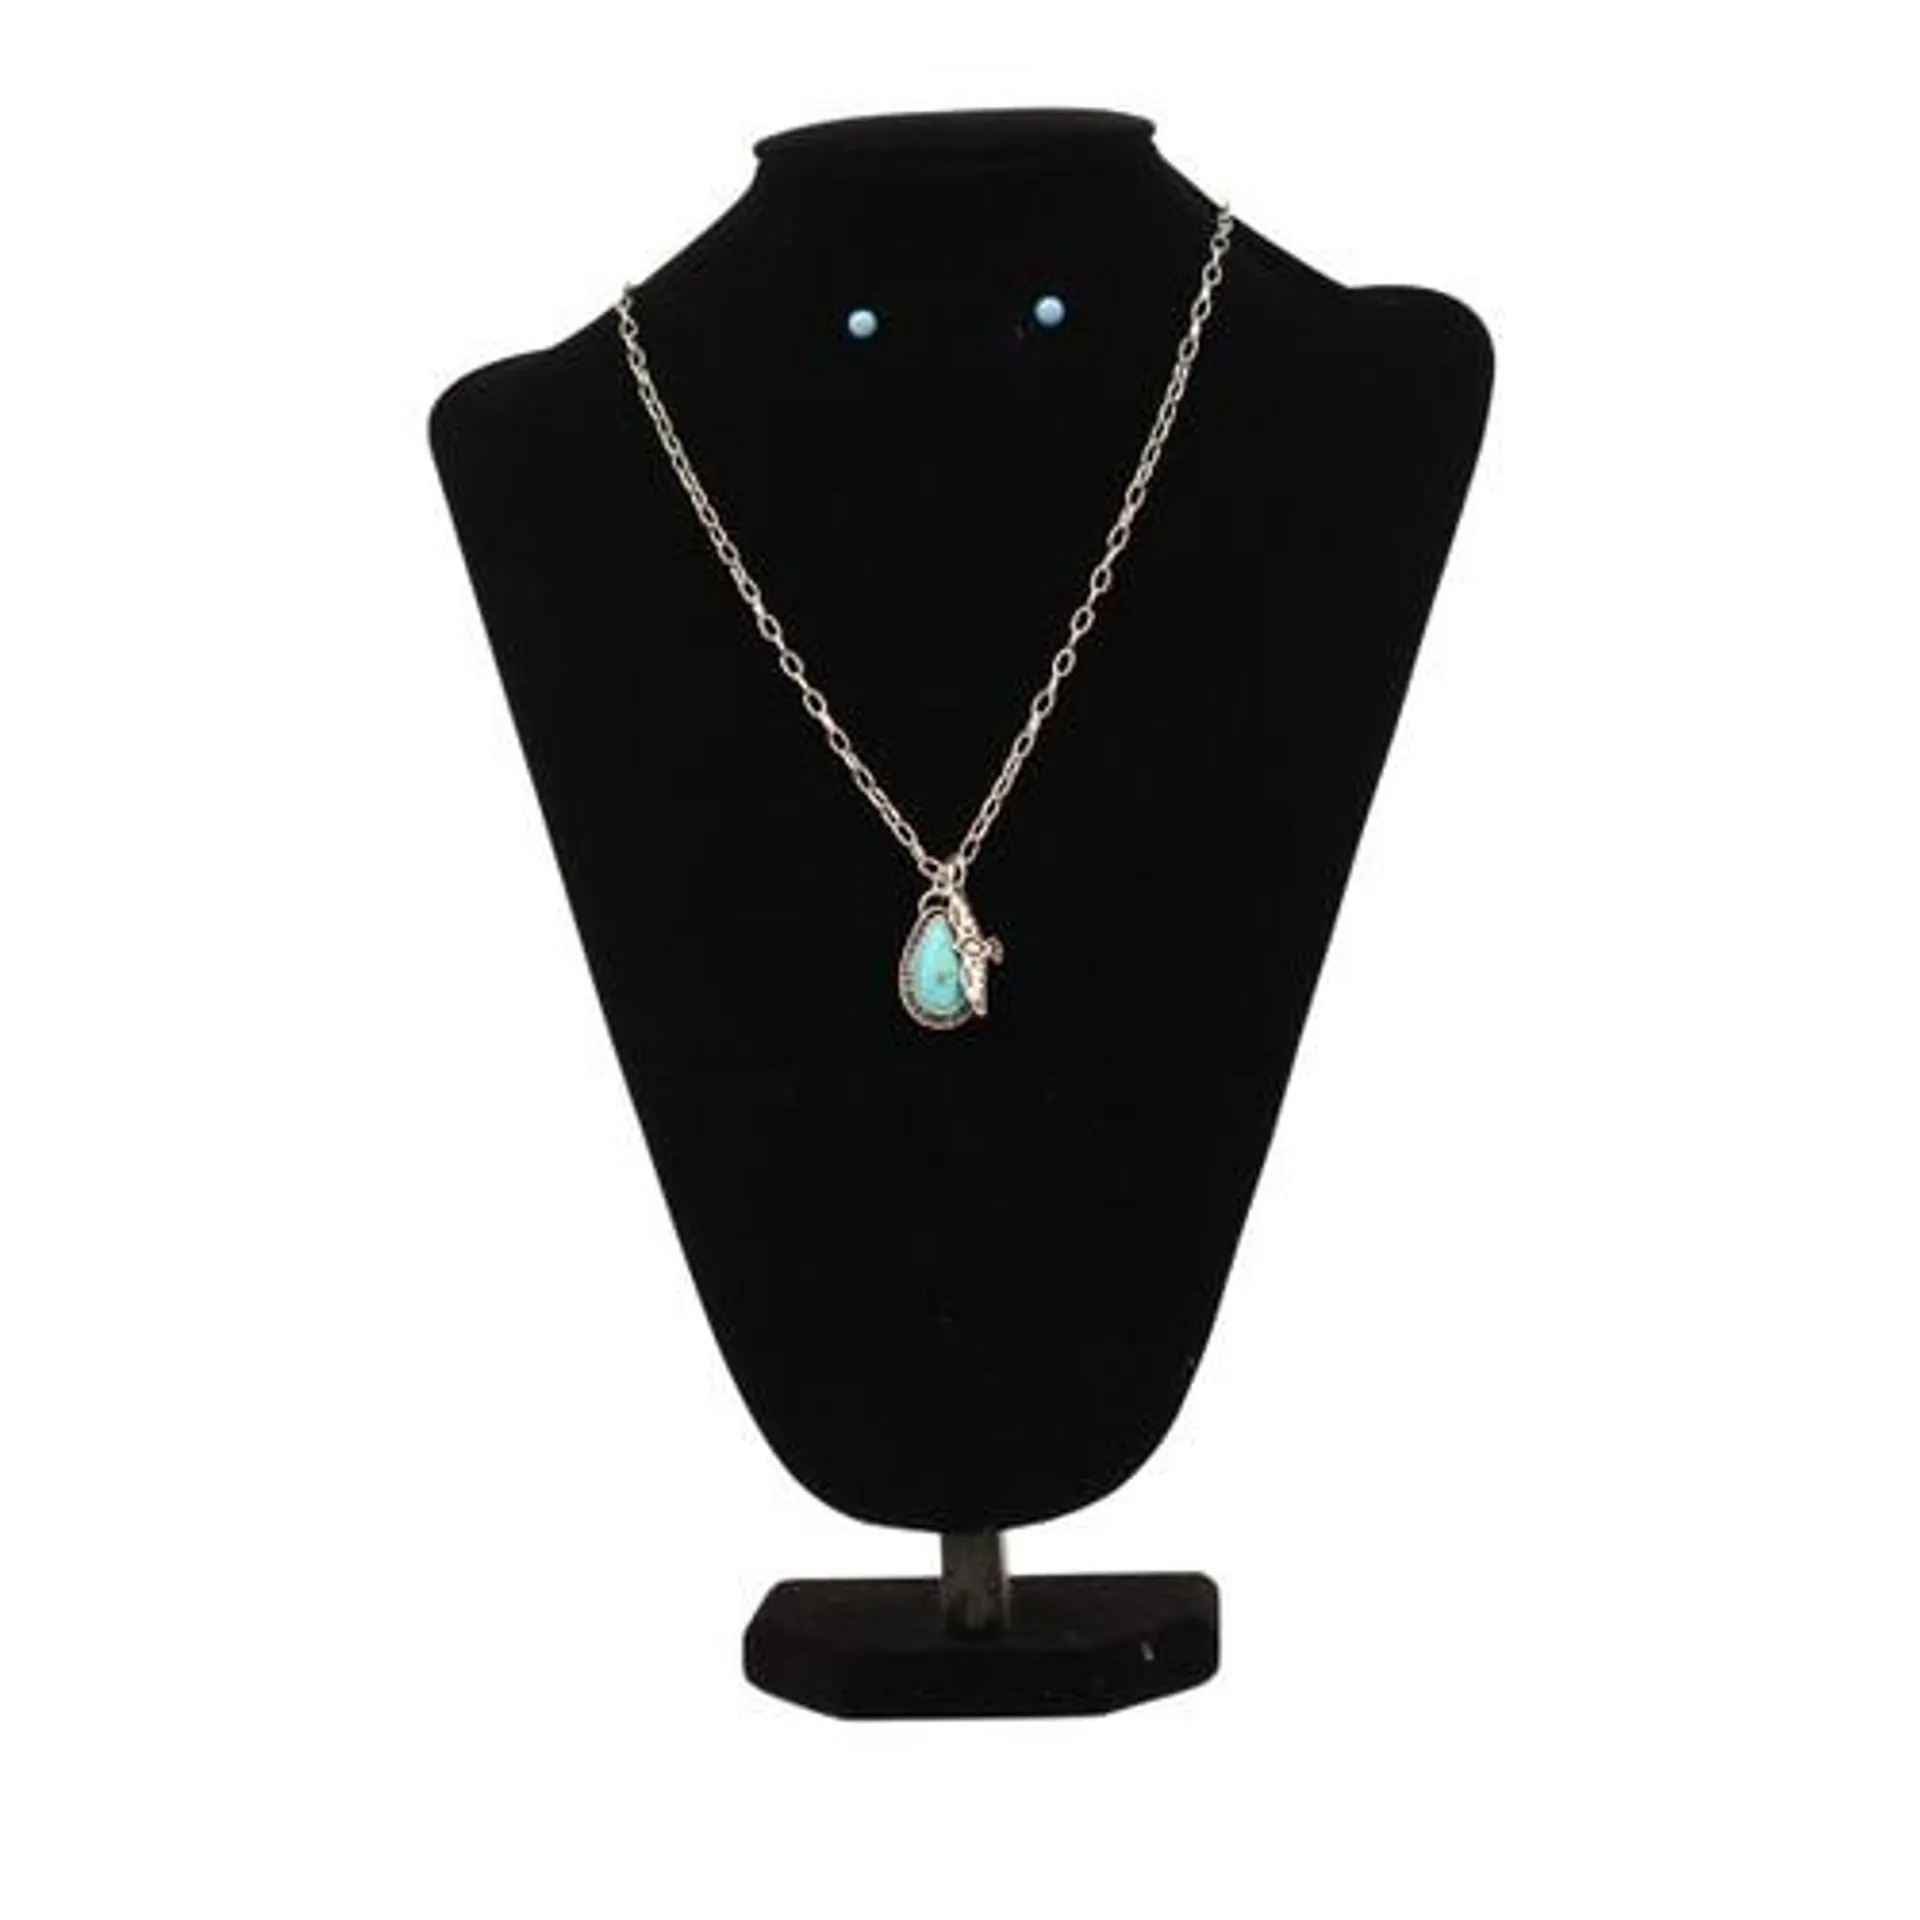 Silver Strike Necklace and Earring Set with Turquoise Oval Pendant & Bird Charm